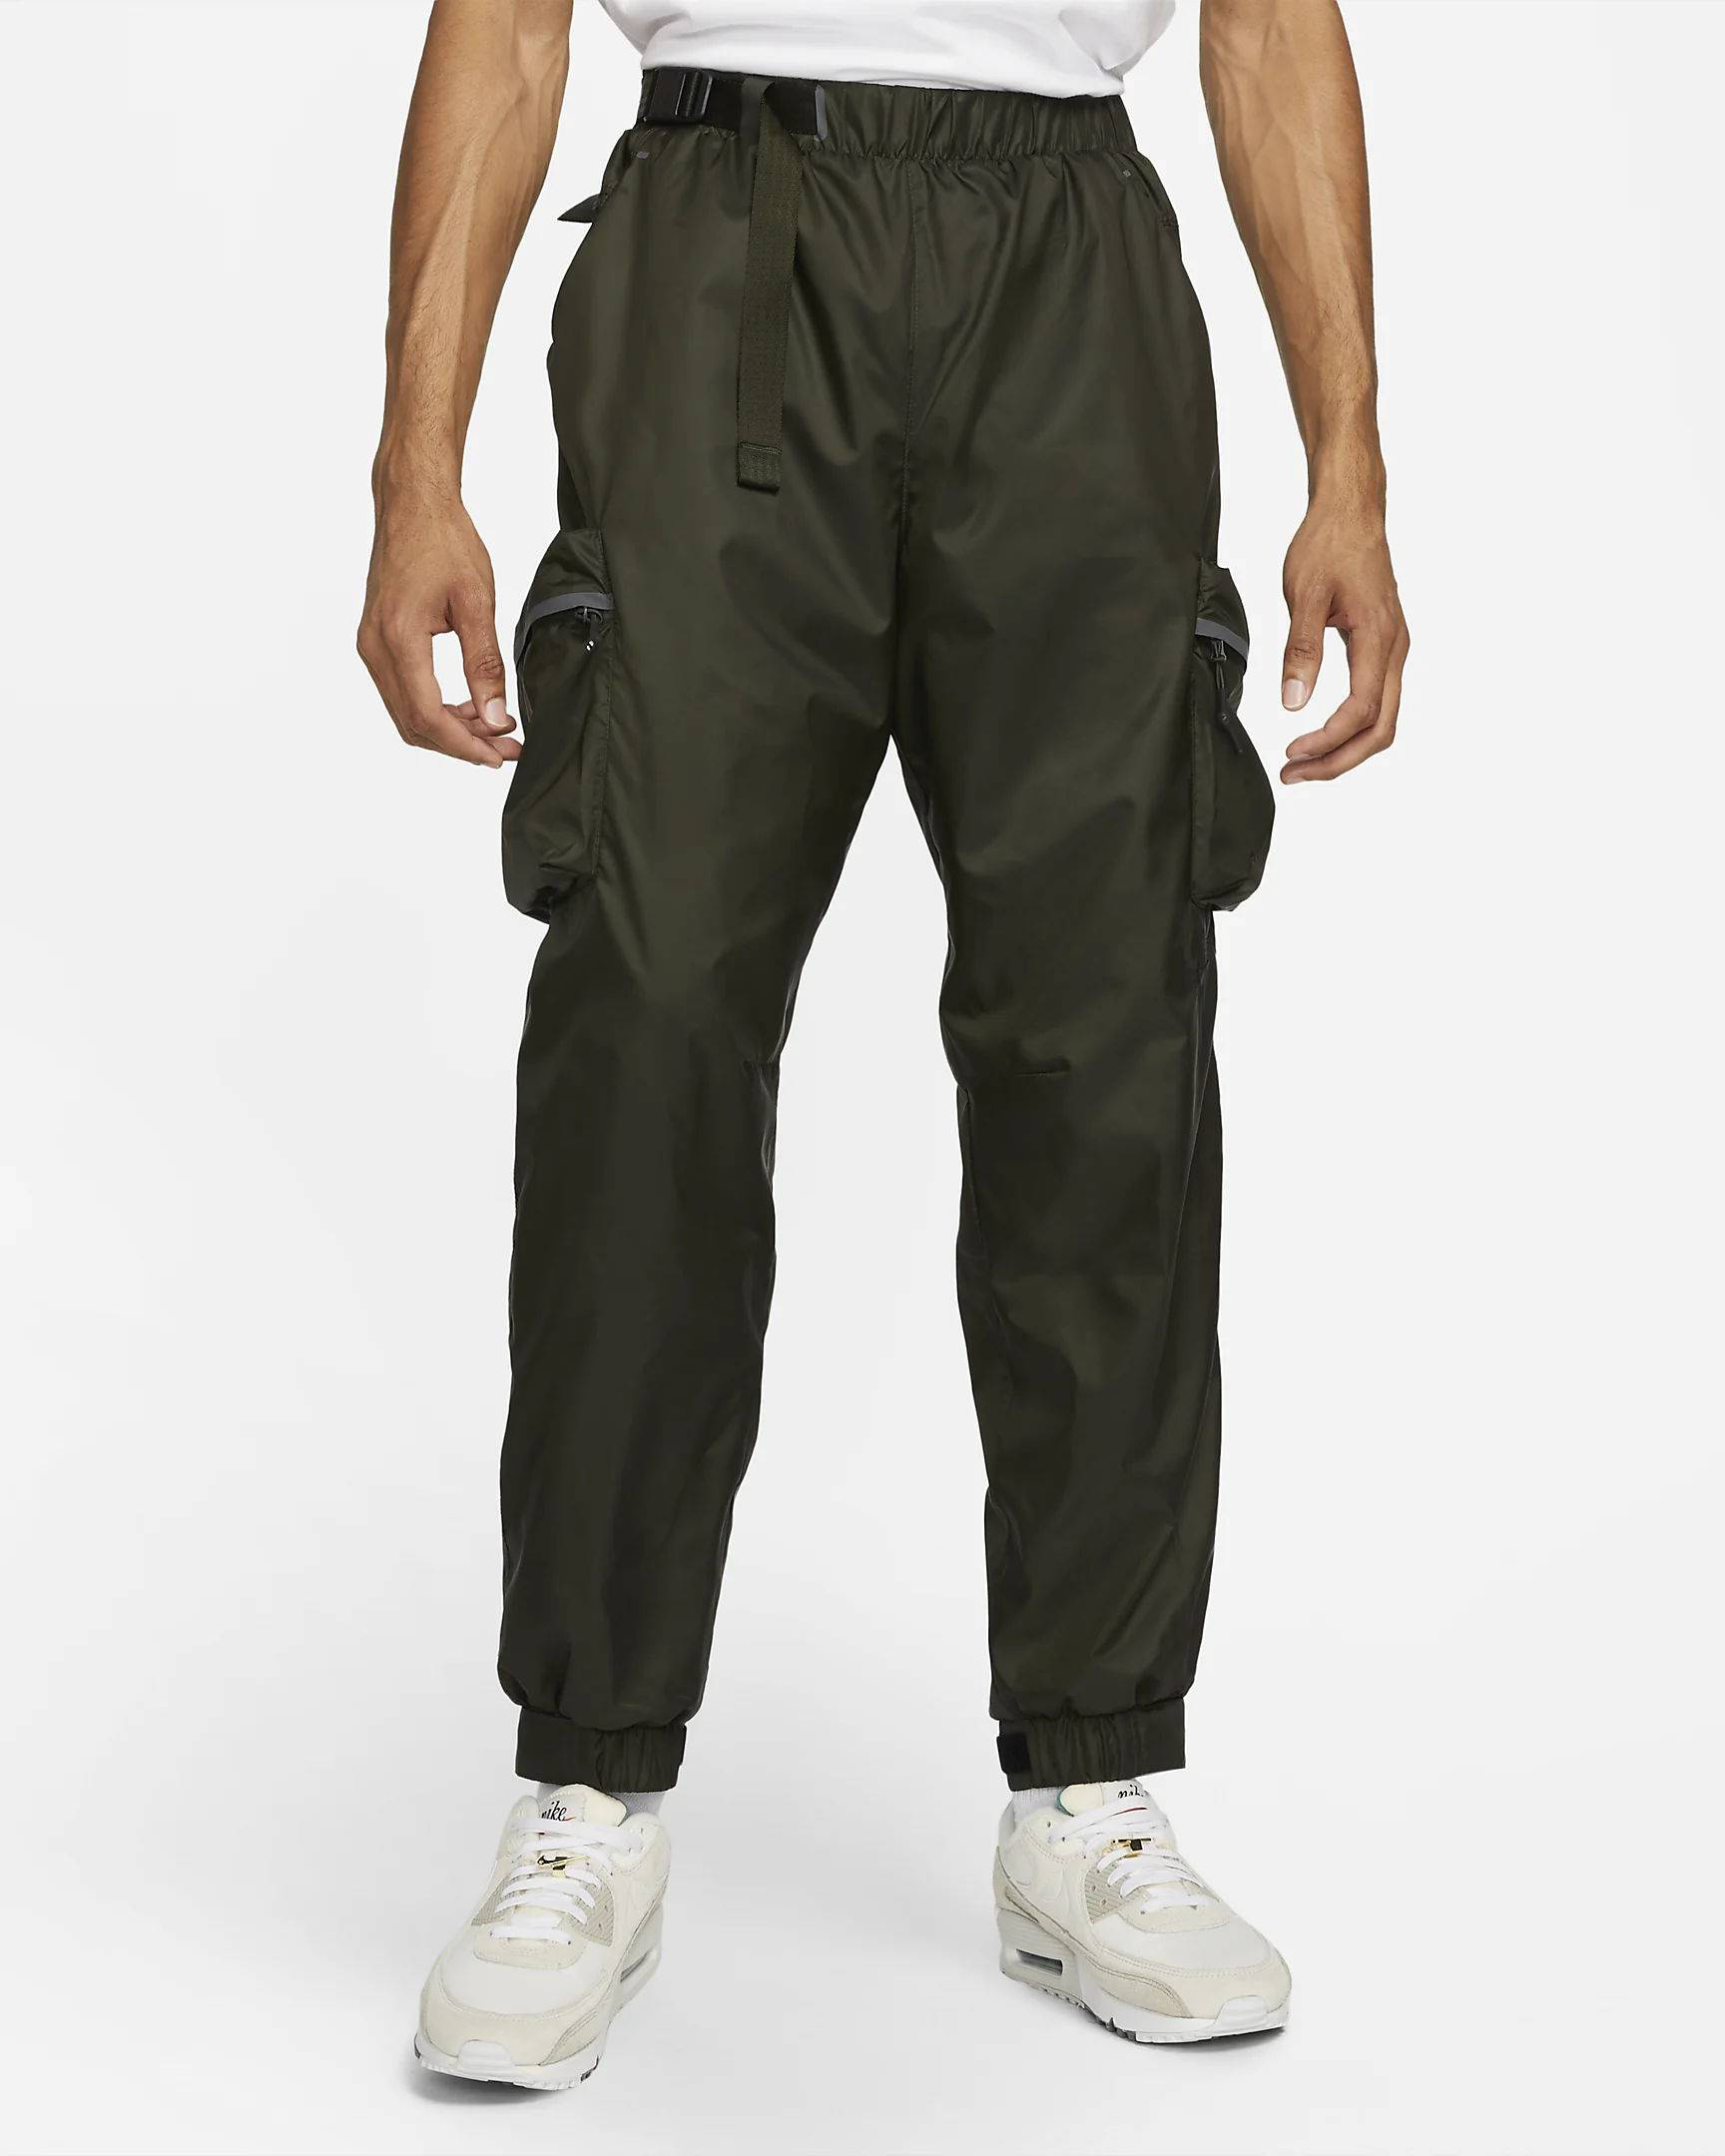 Nike Sportswear Repel Tech Pack Lined Woven Trousers - Sequoia | The ...